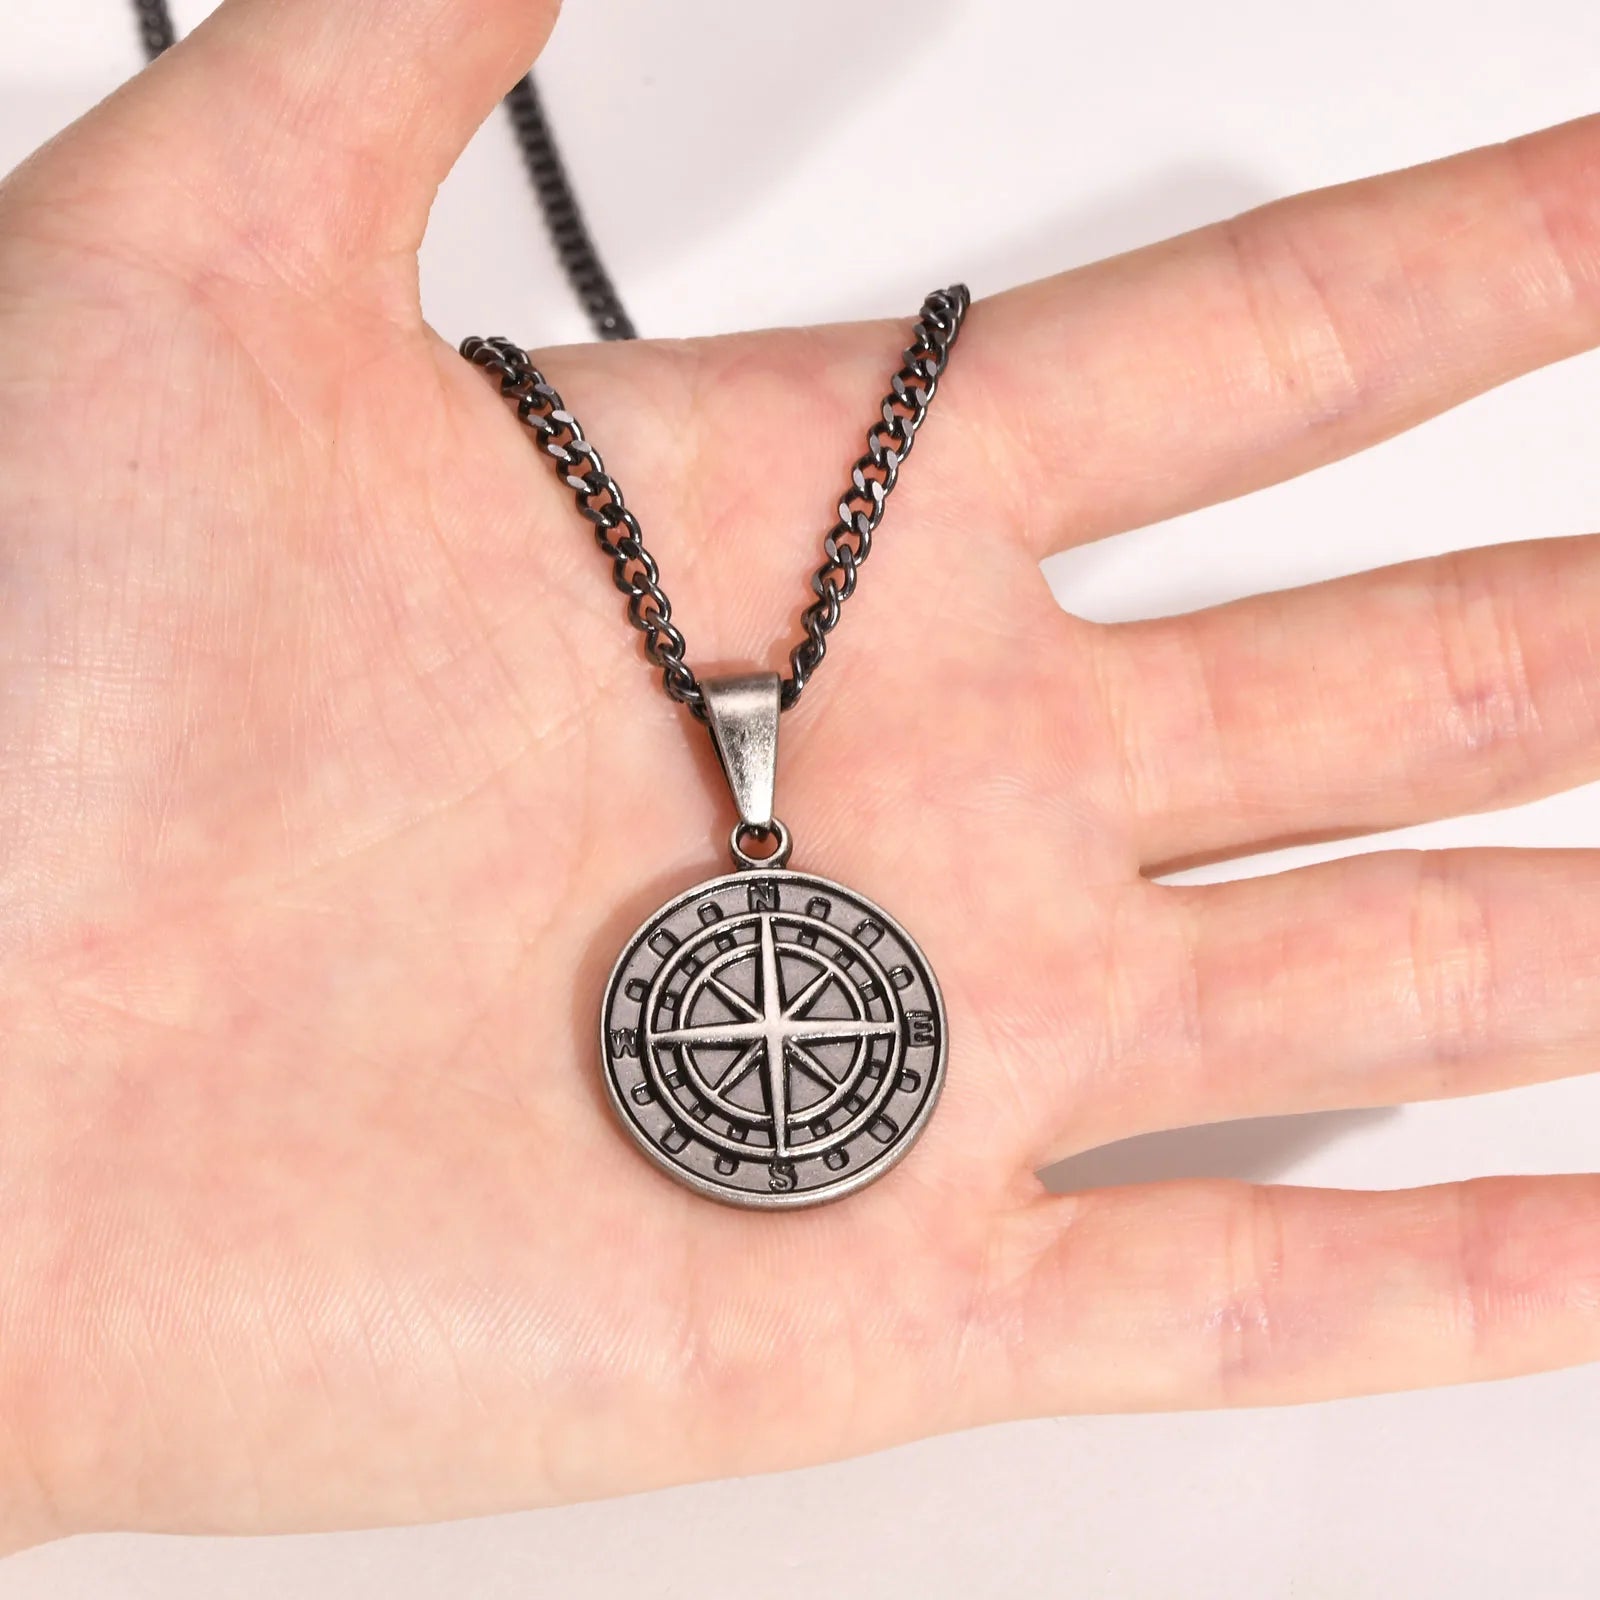 Stainless Steel Nautical Compass Pendant Necklaces - Madeinsea©